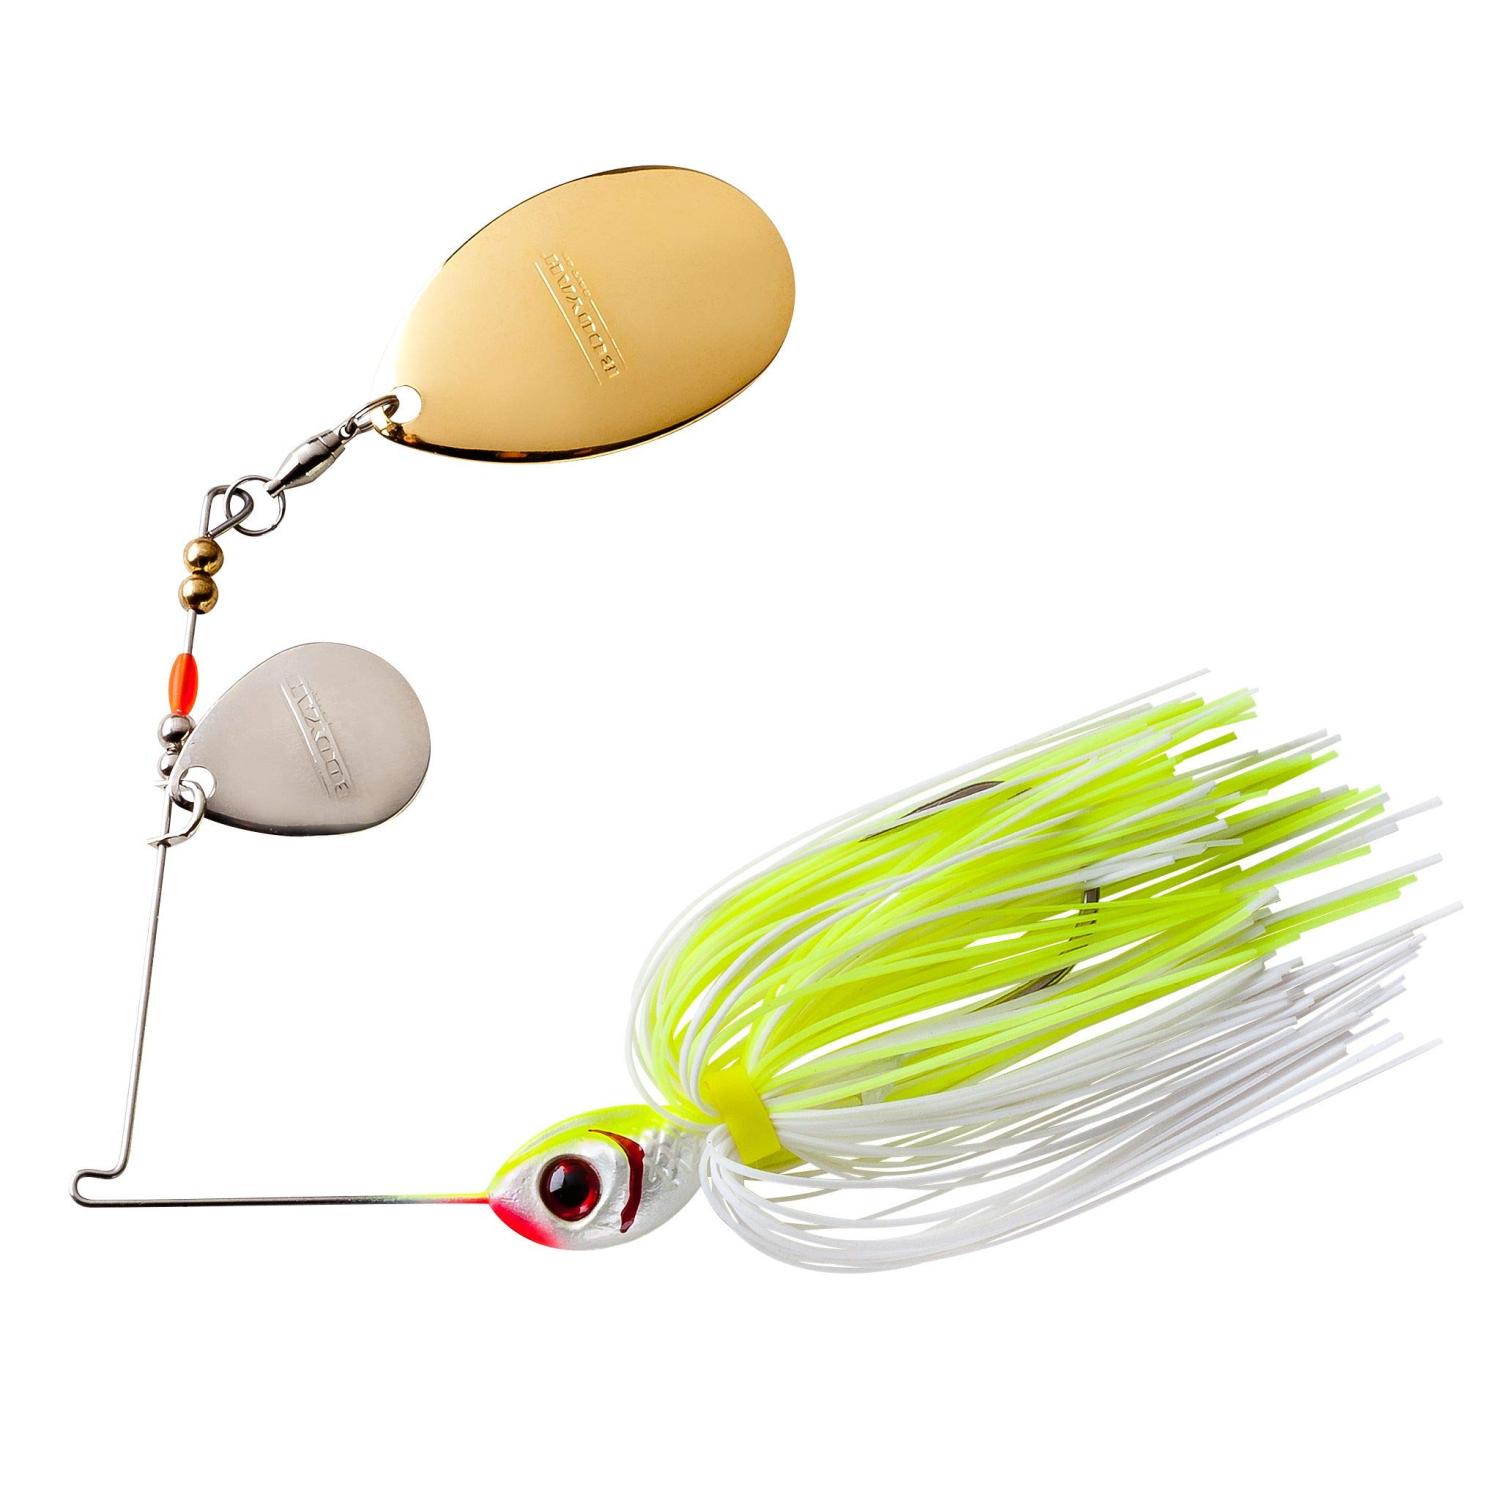 Booyah Colorado Blade Spinner-Bait Bass Fishing Lure White/Chartreuse  Colorado/Indiana (3/8 Oz)